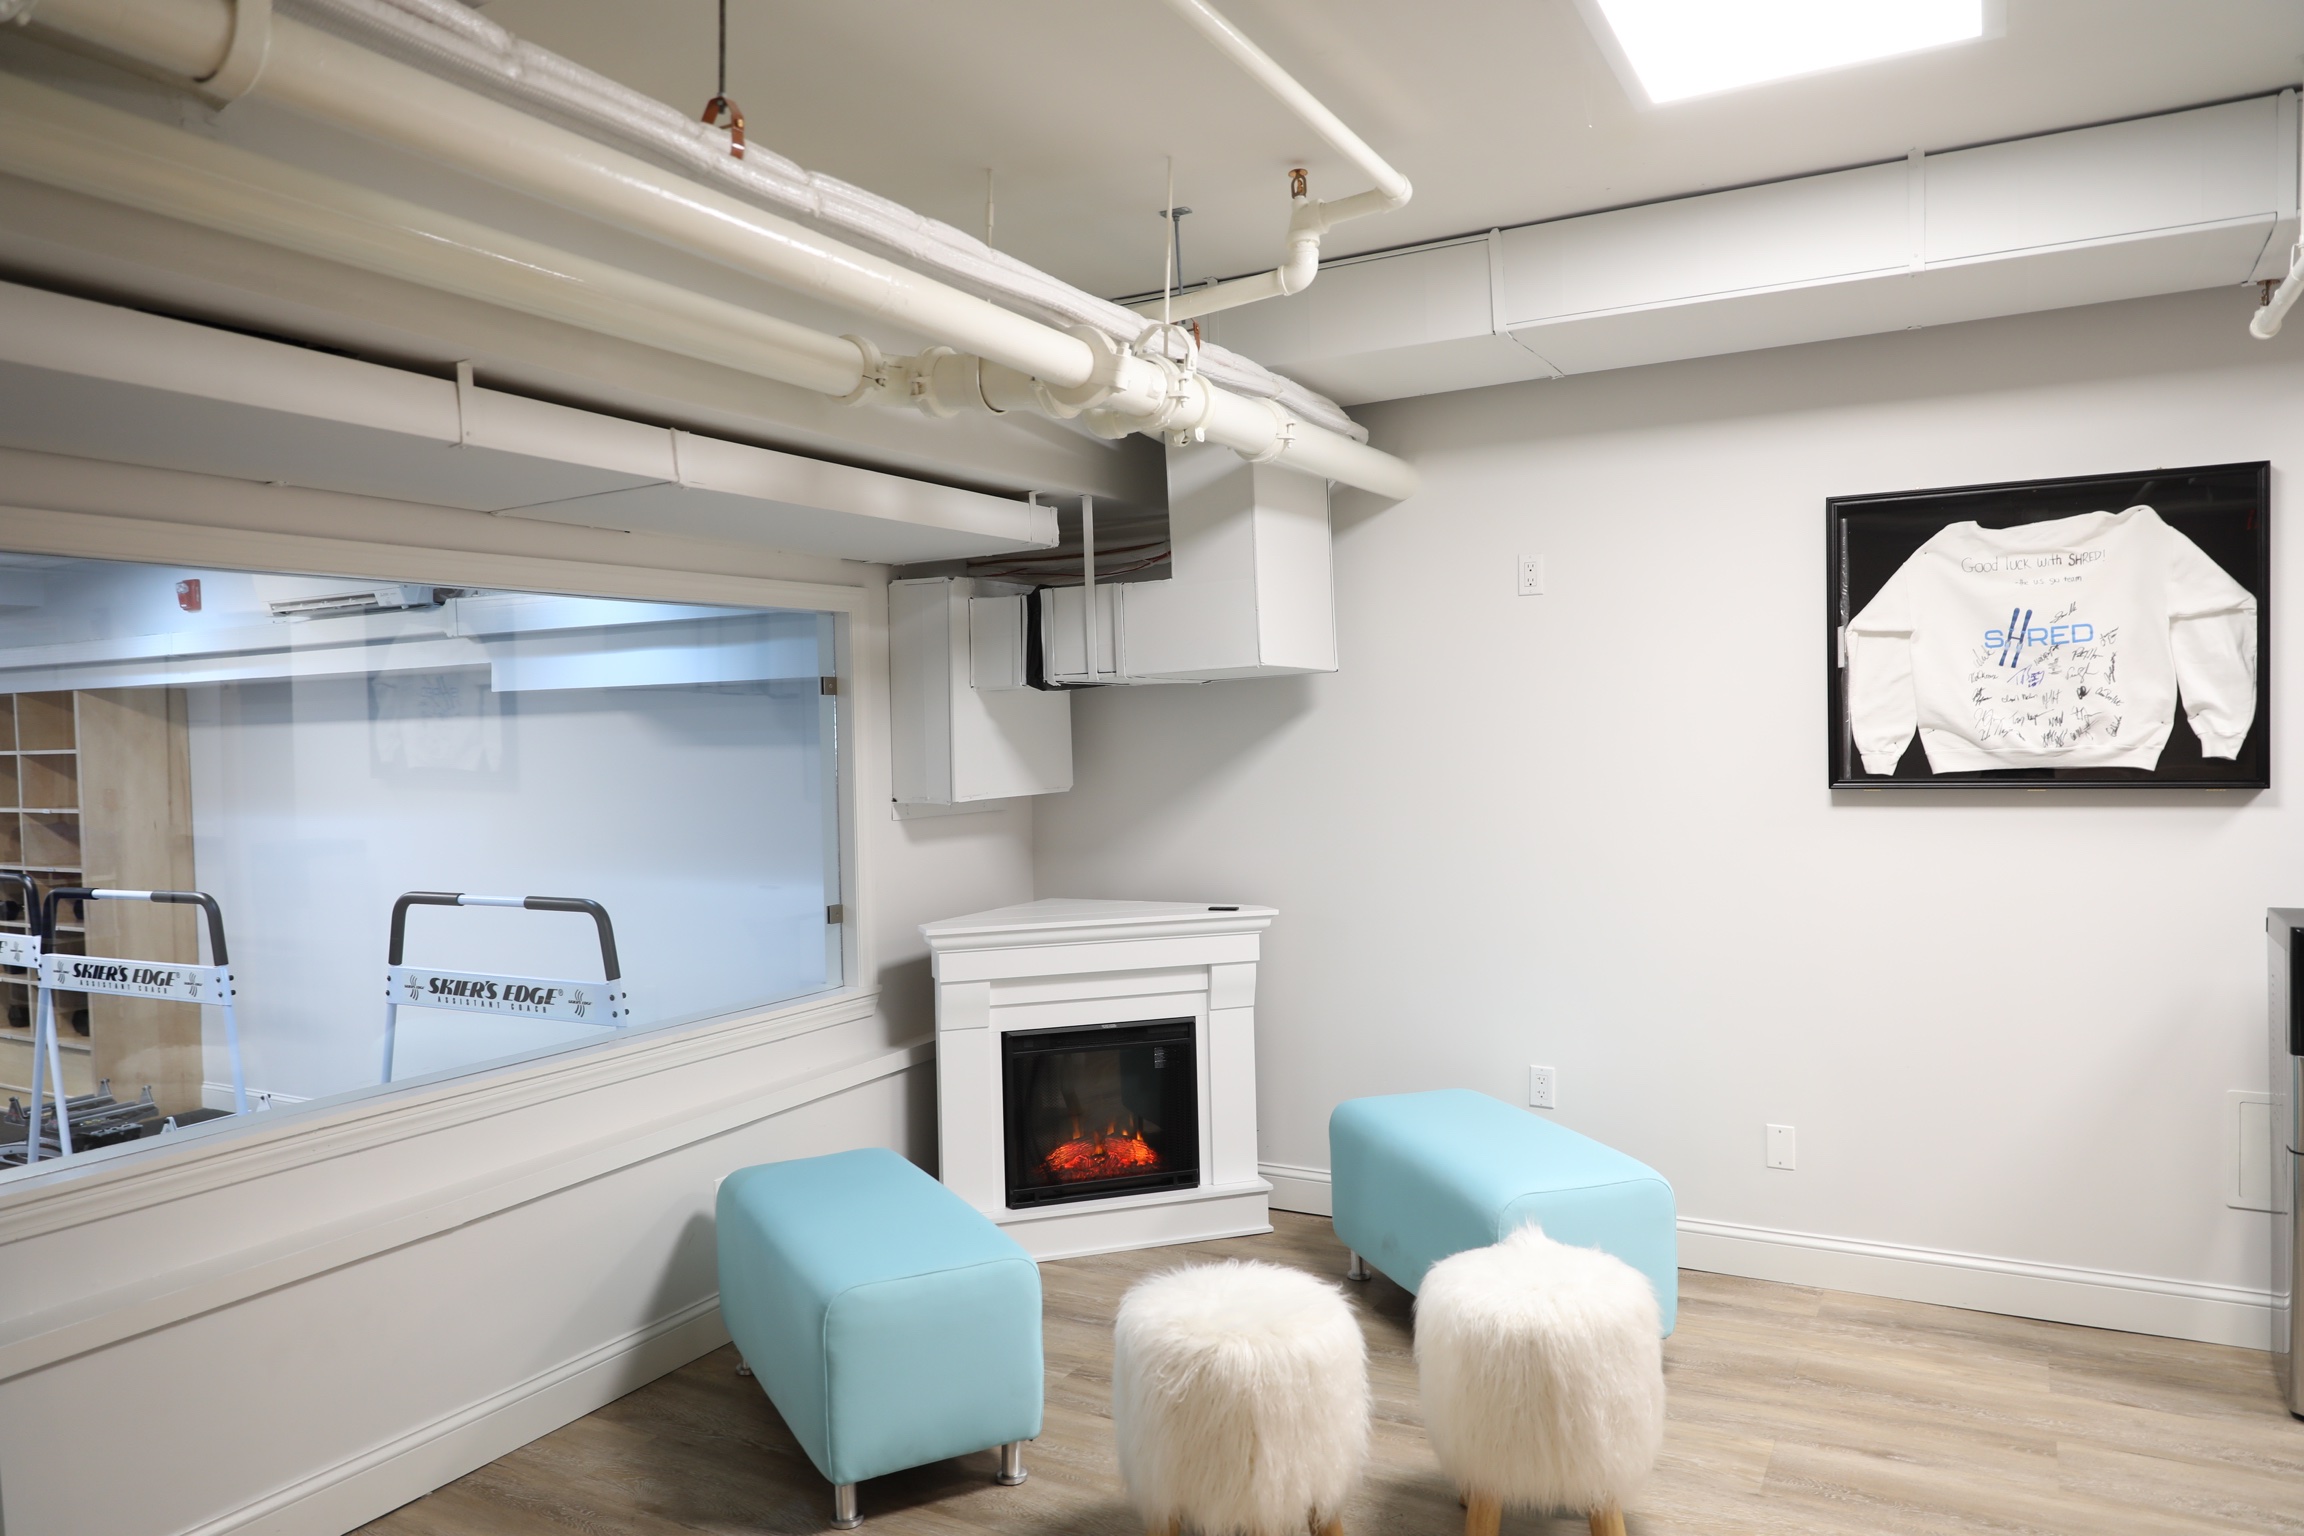 The SHRED fitness studio has a cozy ski lodge setting with a fireplace.